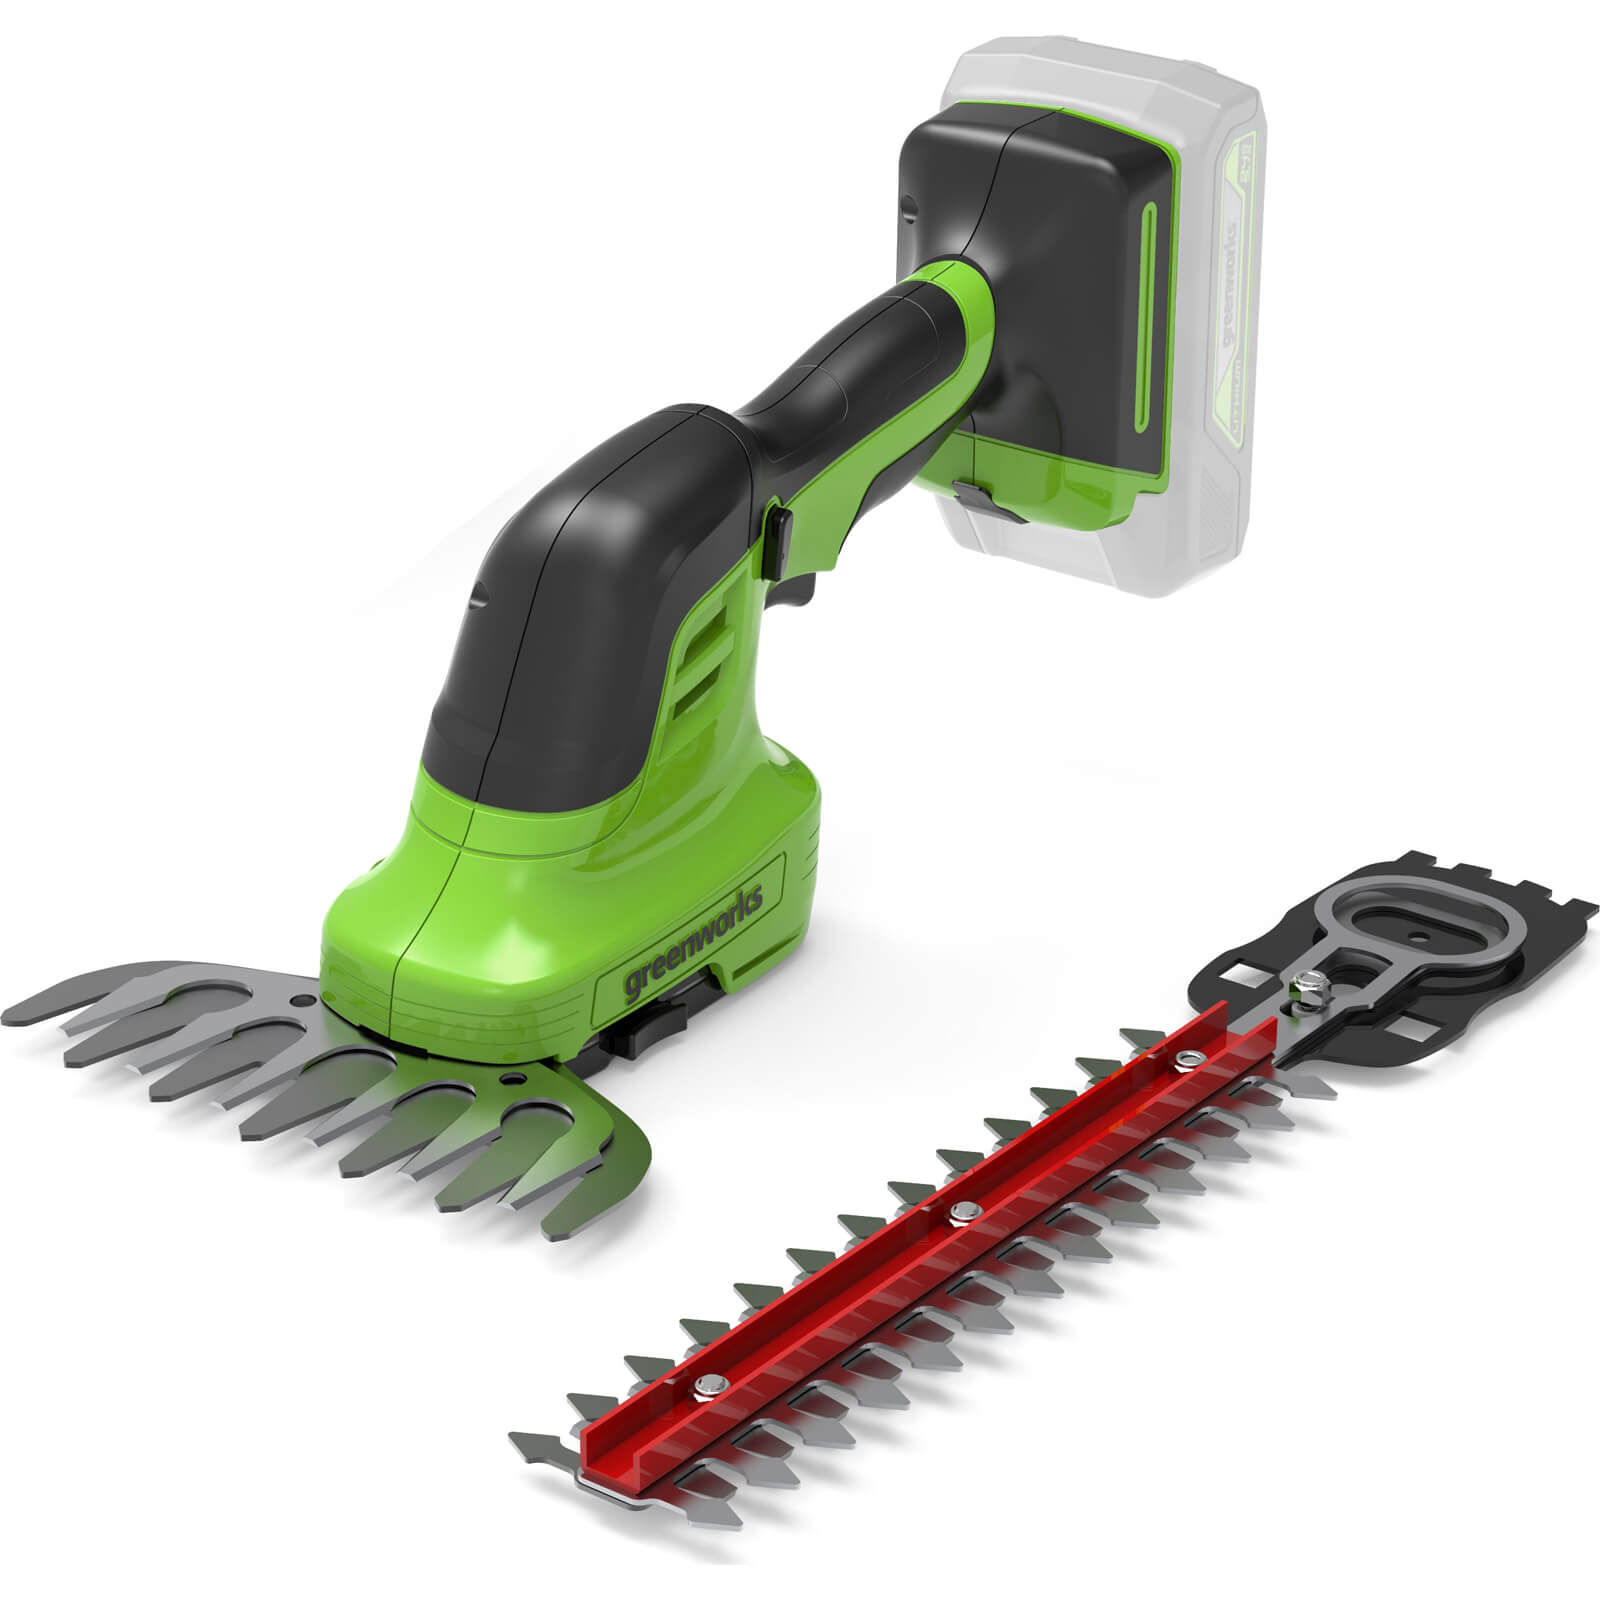 Greenworks G24SHT 24v Cordless Grass and Shrub Shears No Batteries No Charger FREE Gloves, Lubricant & Safety Glasses Worth £12